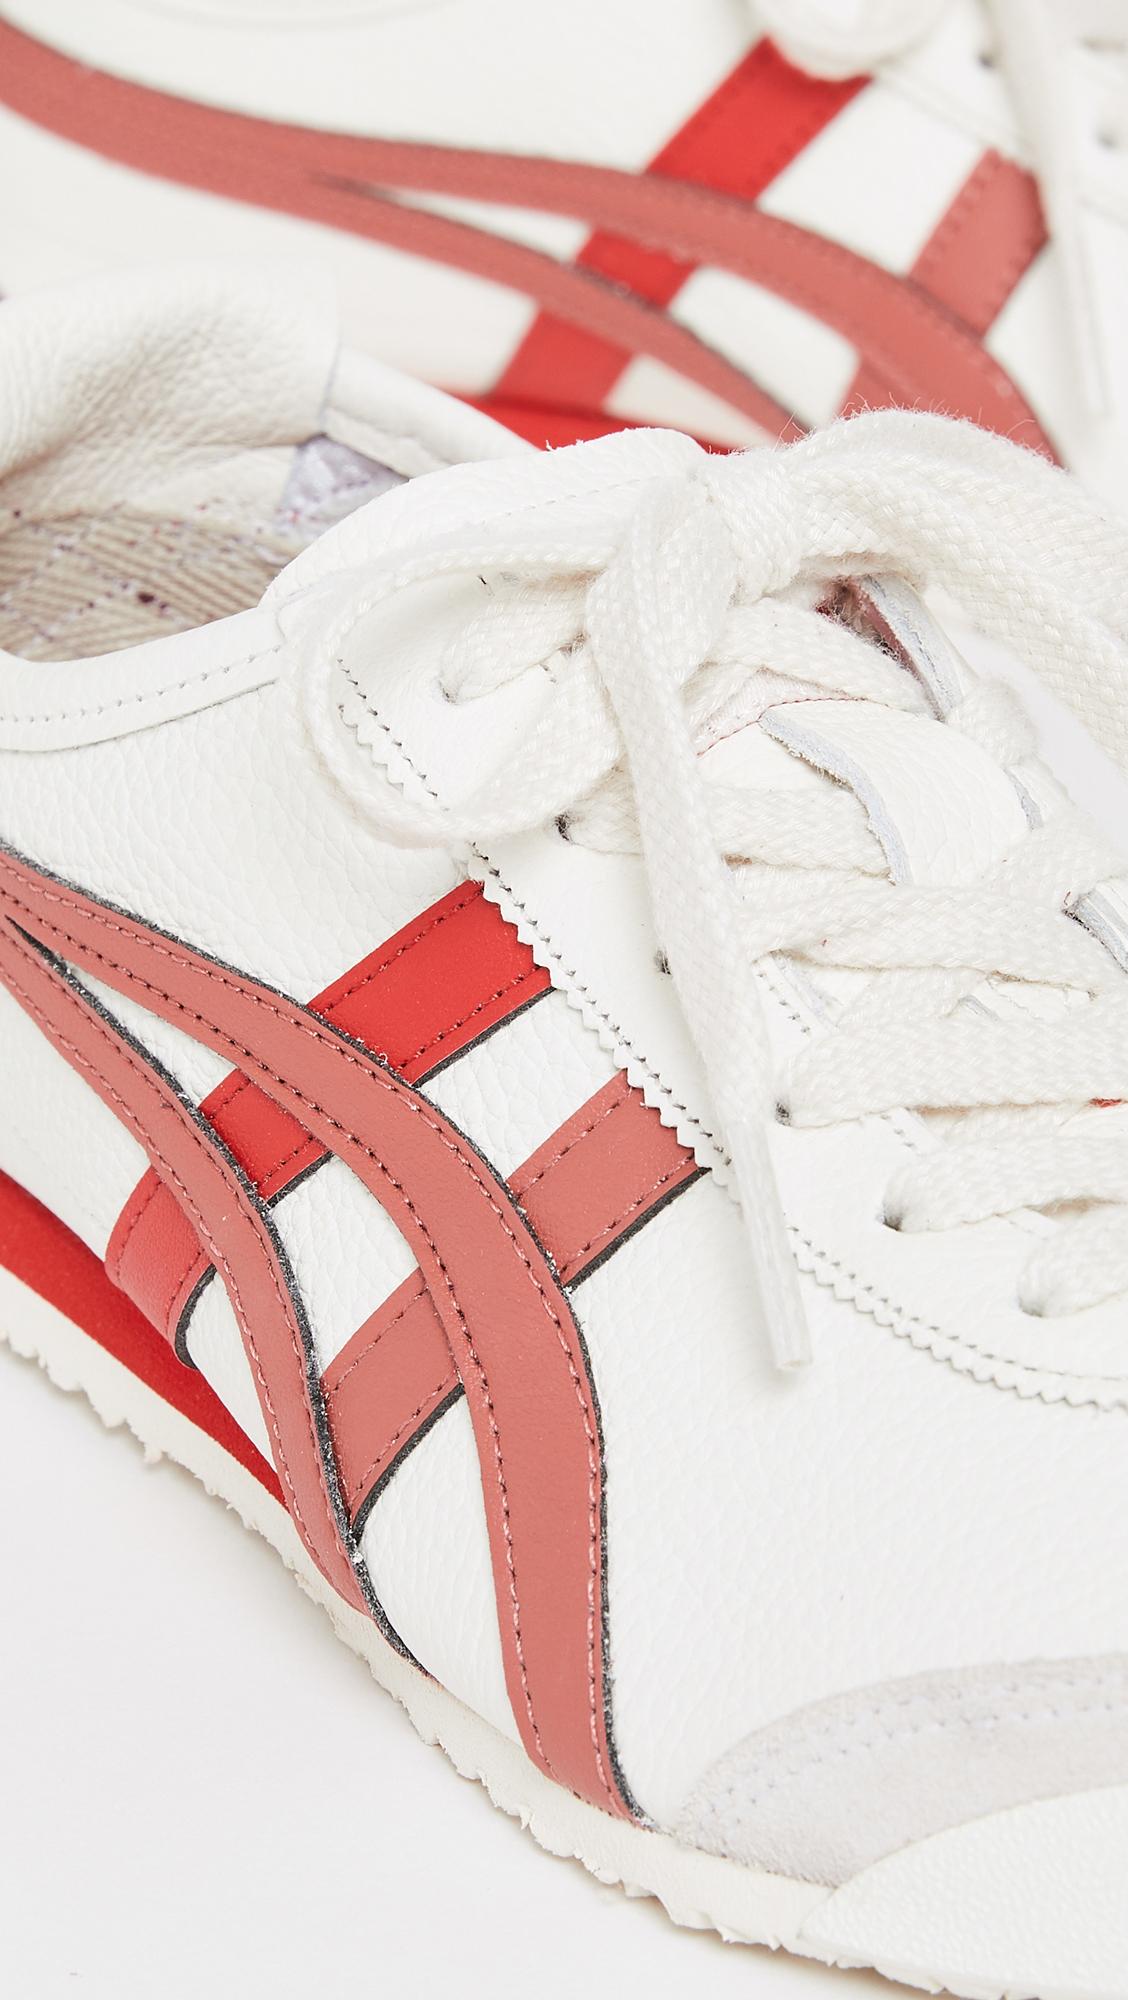 Onitsuka Tiger Leather Mexico 66 Sneakers in Cream/Red Brick (Red) | Lyst